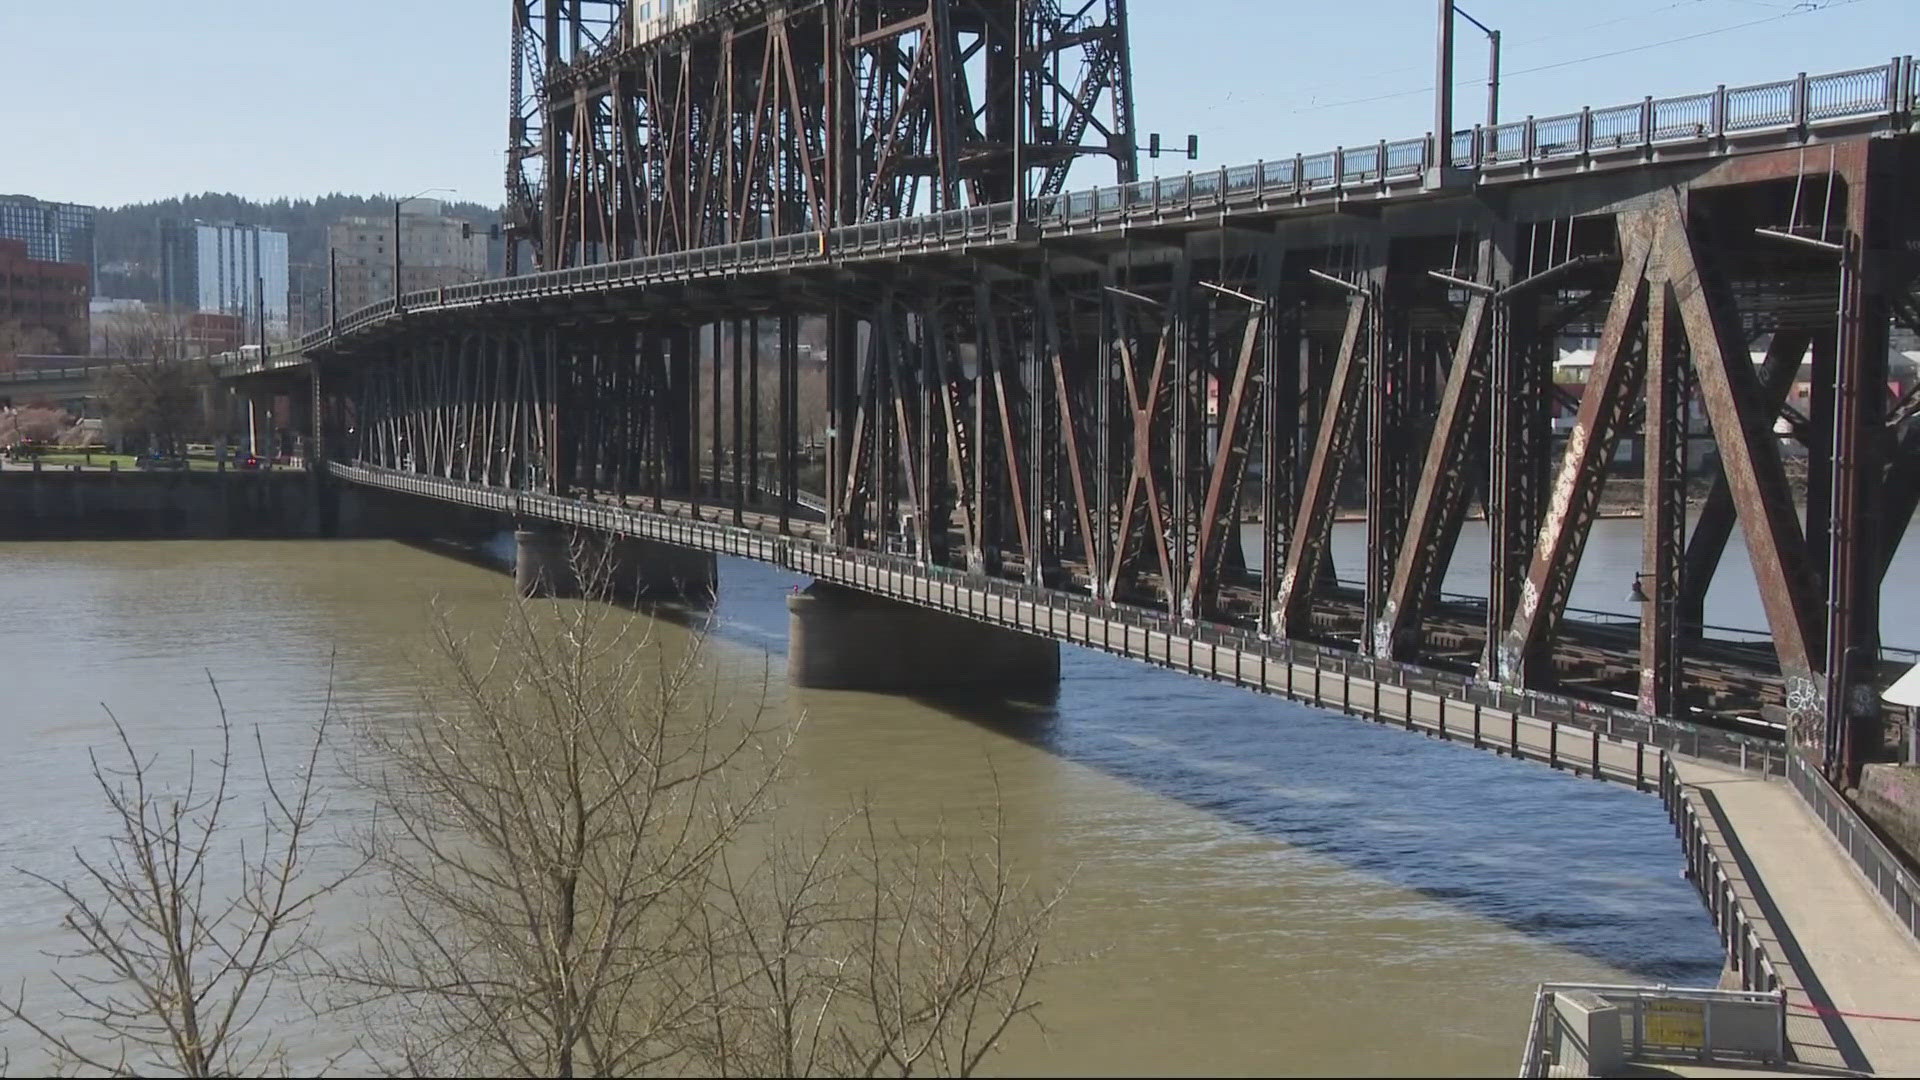 A man was killed in a stabbing on the lower deck bike and pedestrian path of the Steel Bridge Friday afternoon.